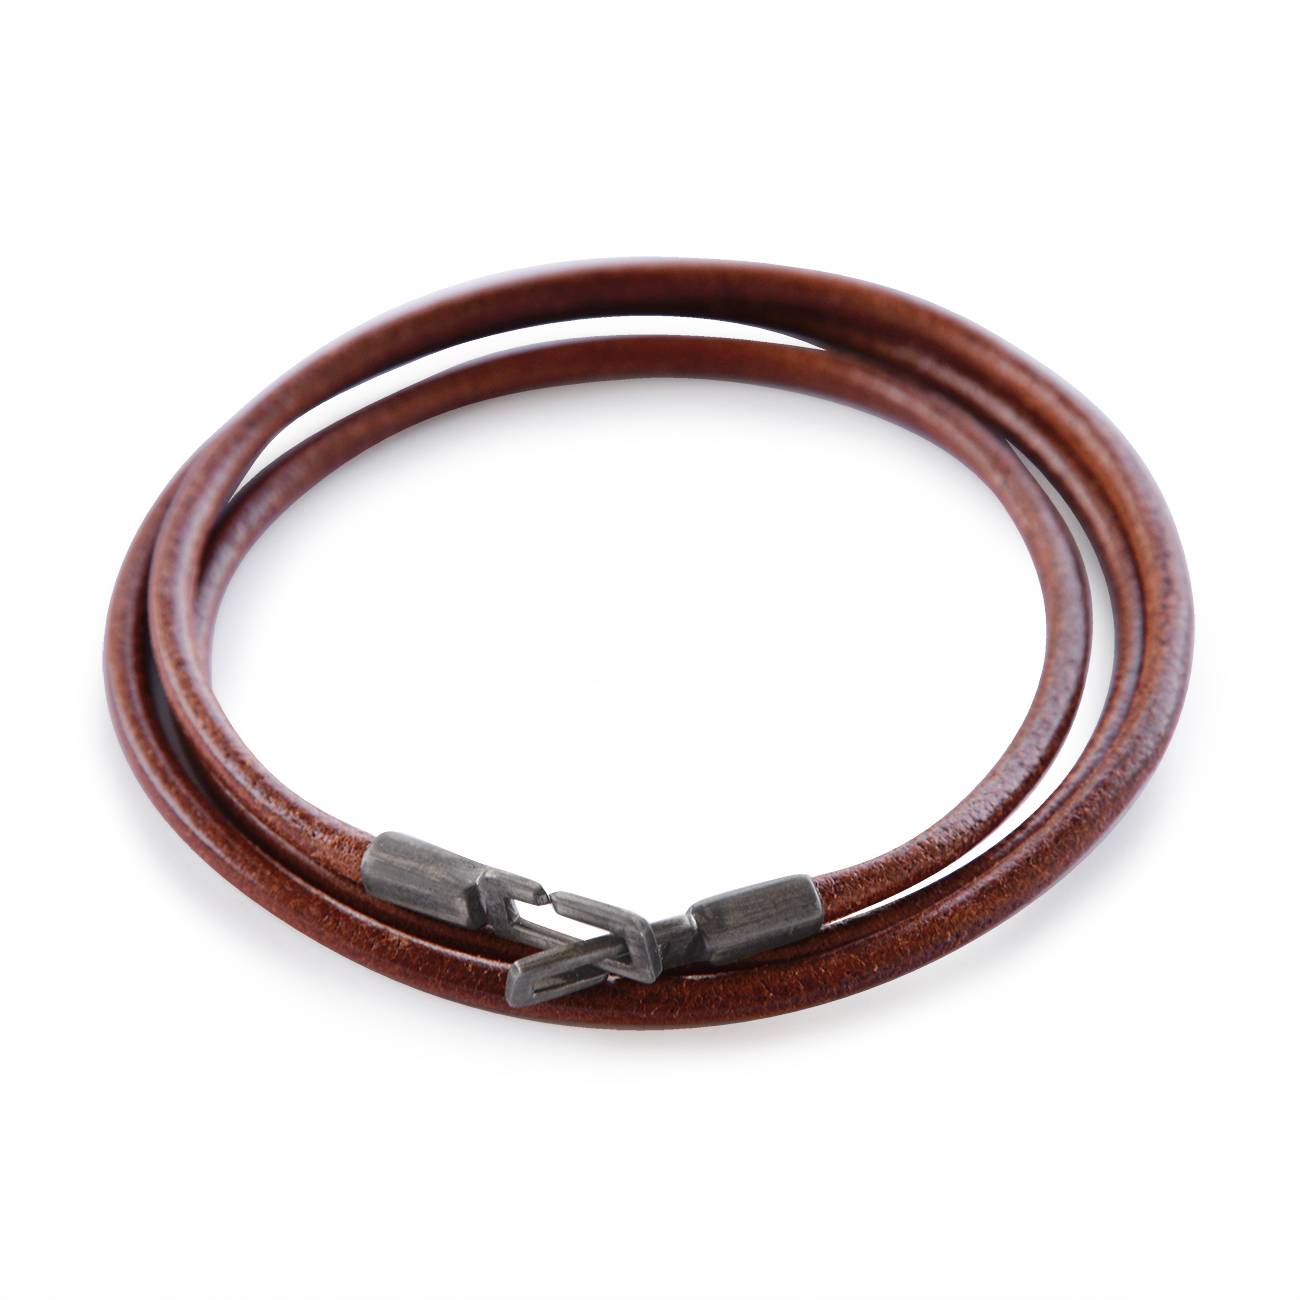 Leather wrap bracelet brown 3mm | Handmade Leather cords Cords & Chains ...